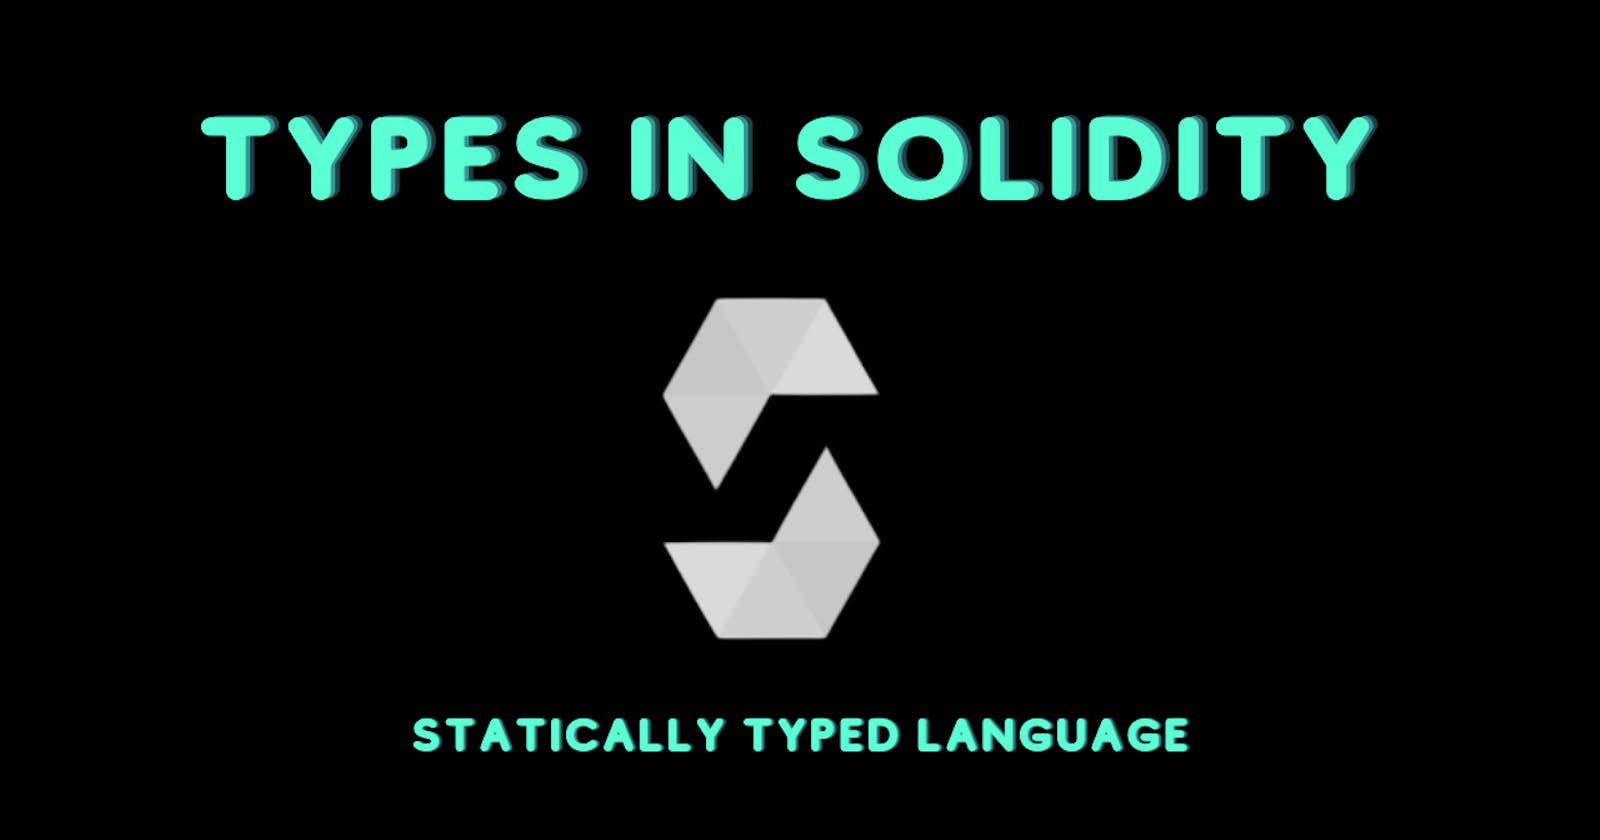 Commonly used types in solidity